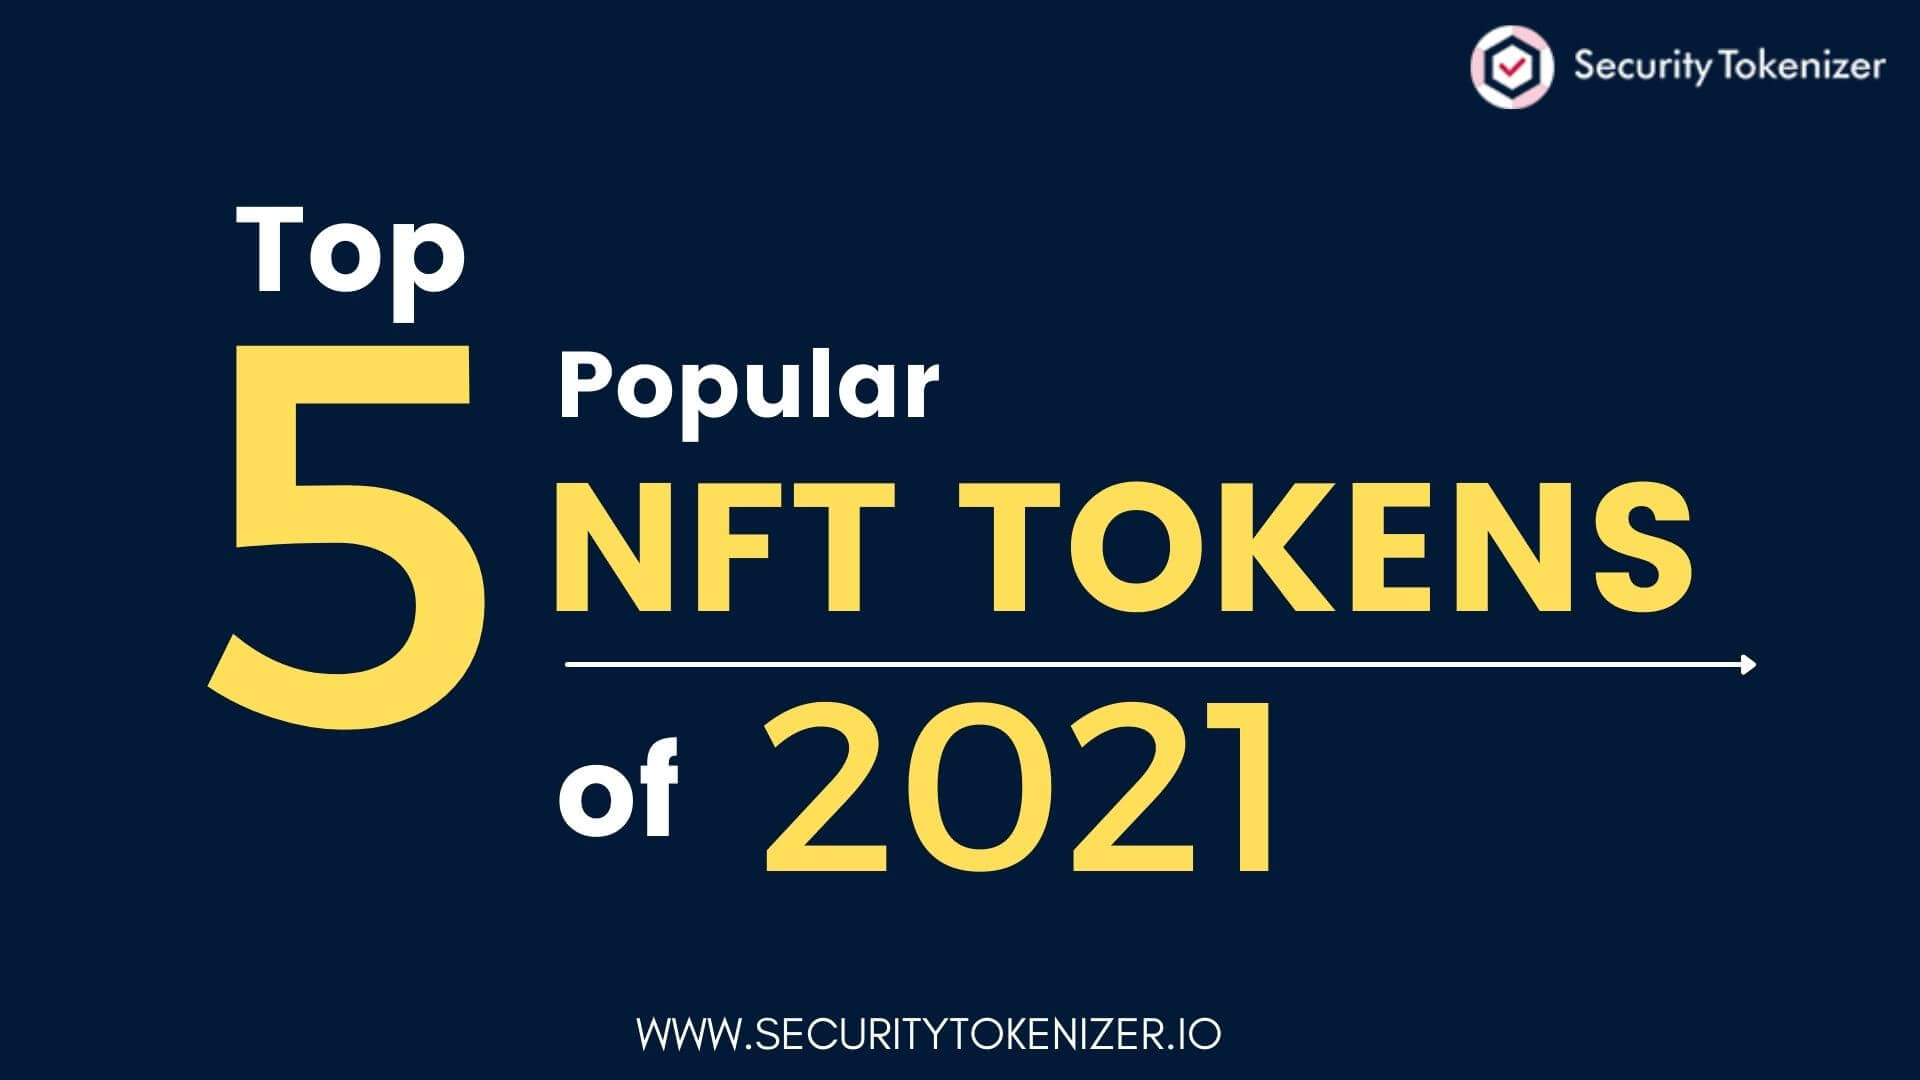 Top 5 Popular Non-Fungible (NFT) Tokens of 2021